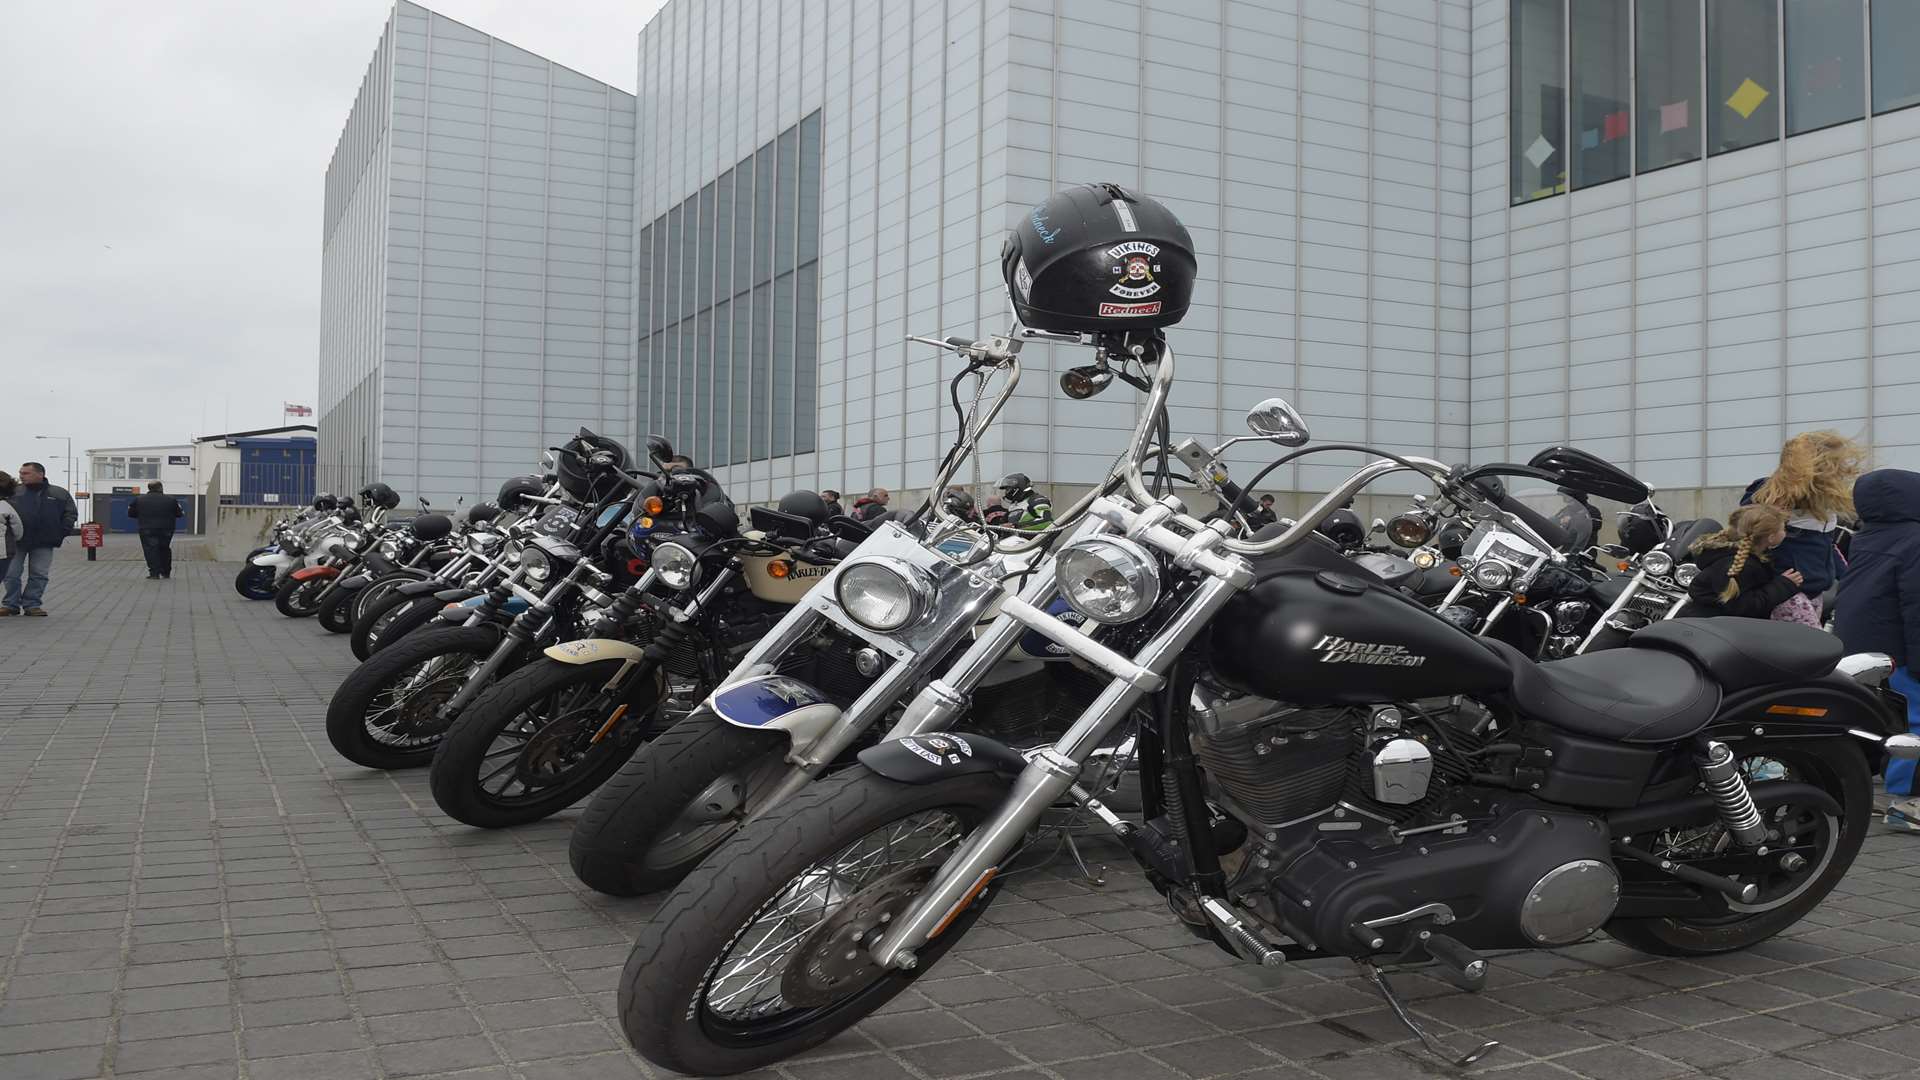 Bikes could be seen outside the Turner Contemporary